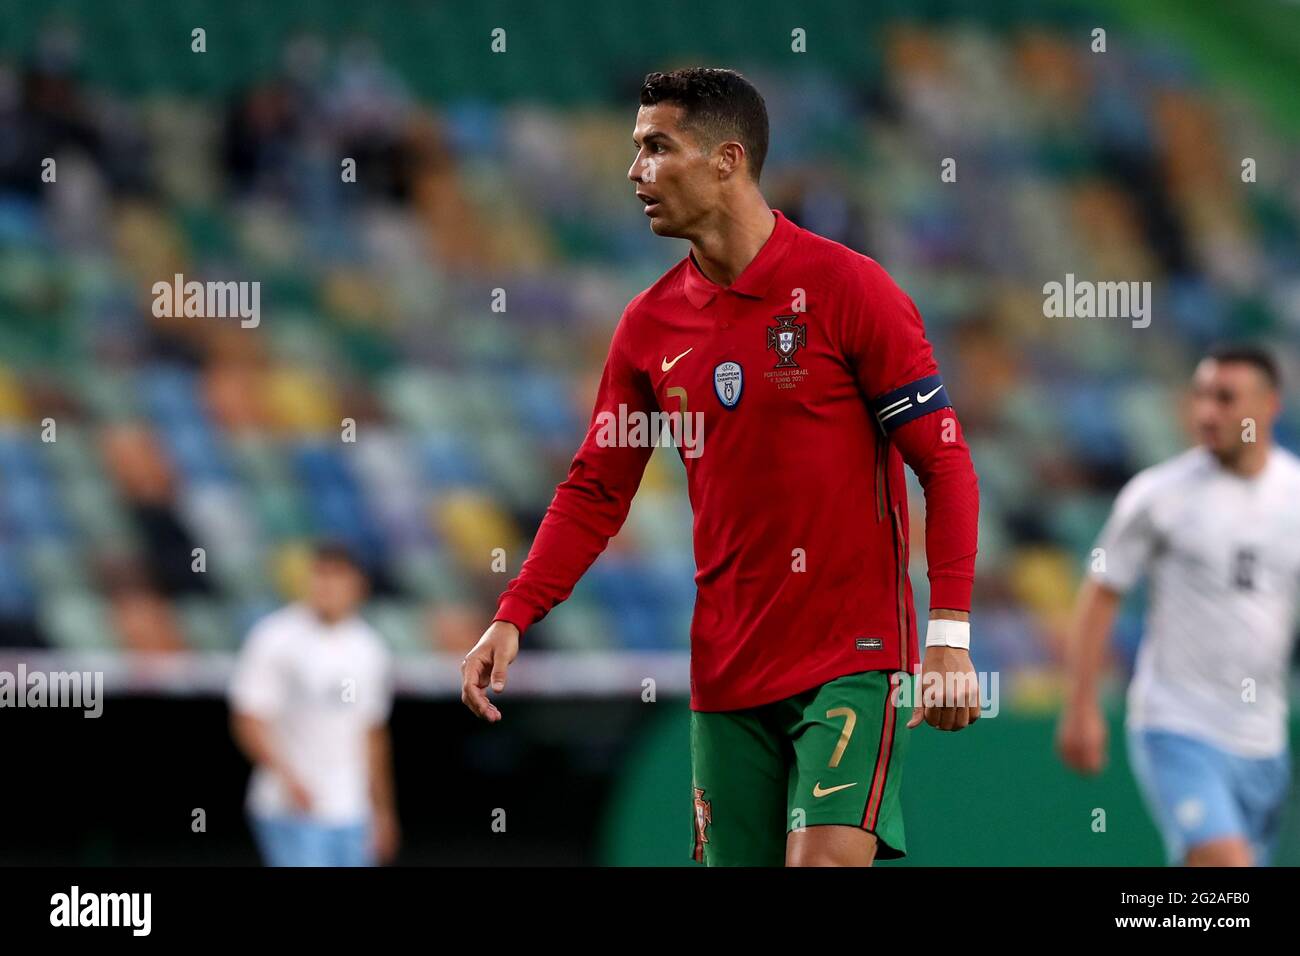 Lisbon, Portugal. 9th June, 2021. Cristiano Ronaldo of Portugal reacts  during a friendly football match between